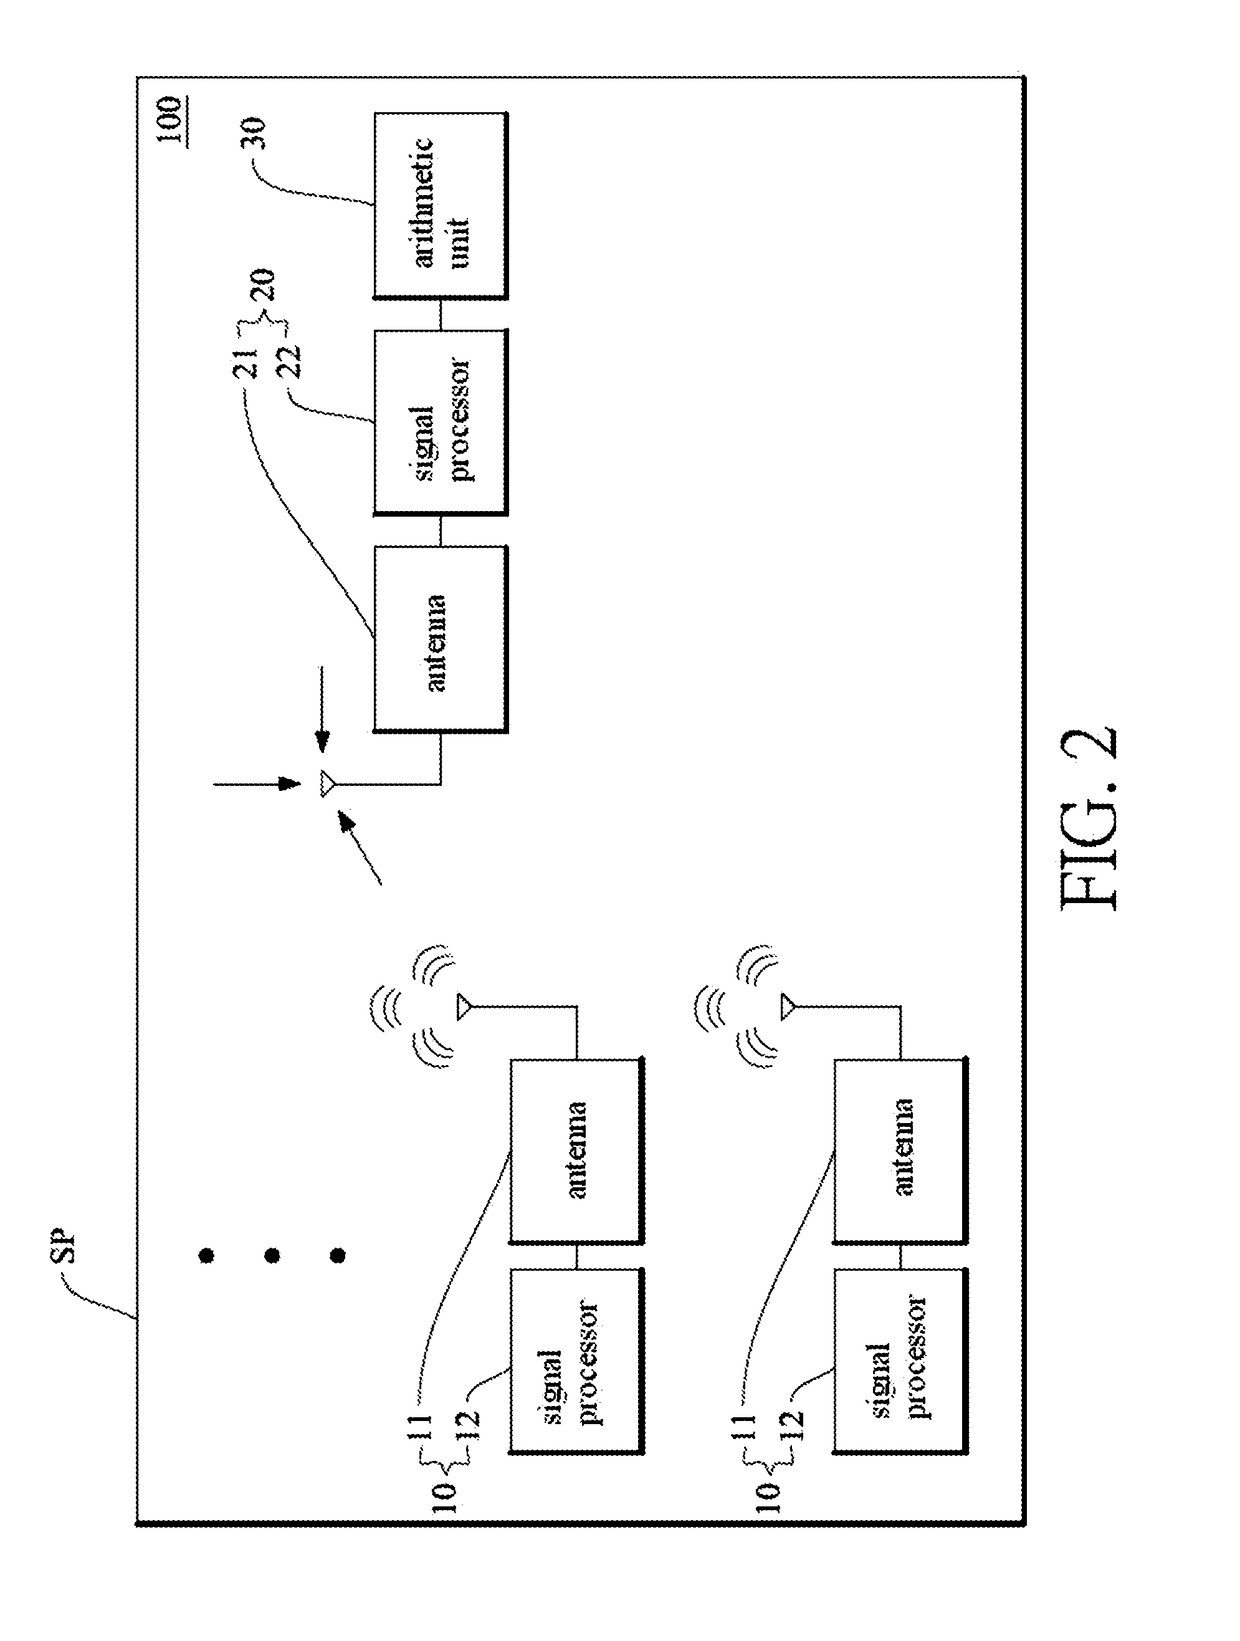 Sinr-based intrusion detection system and method thereof